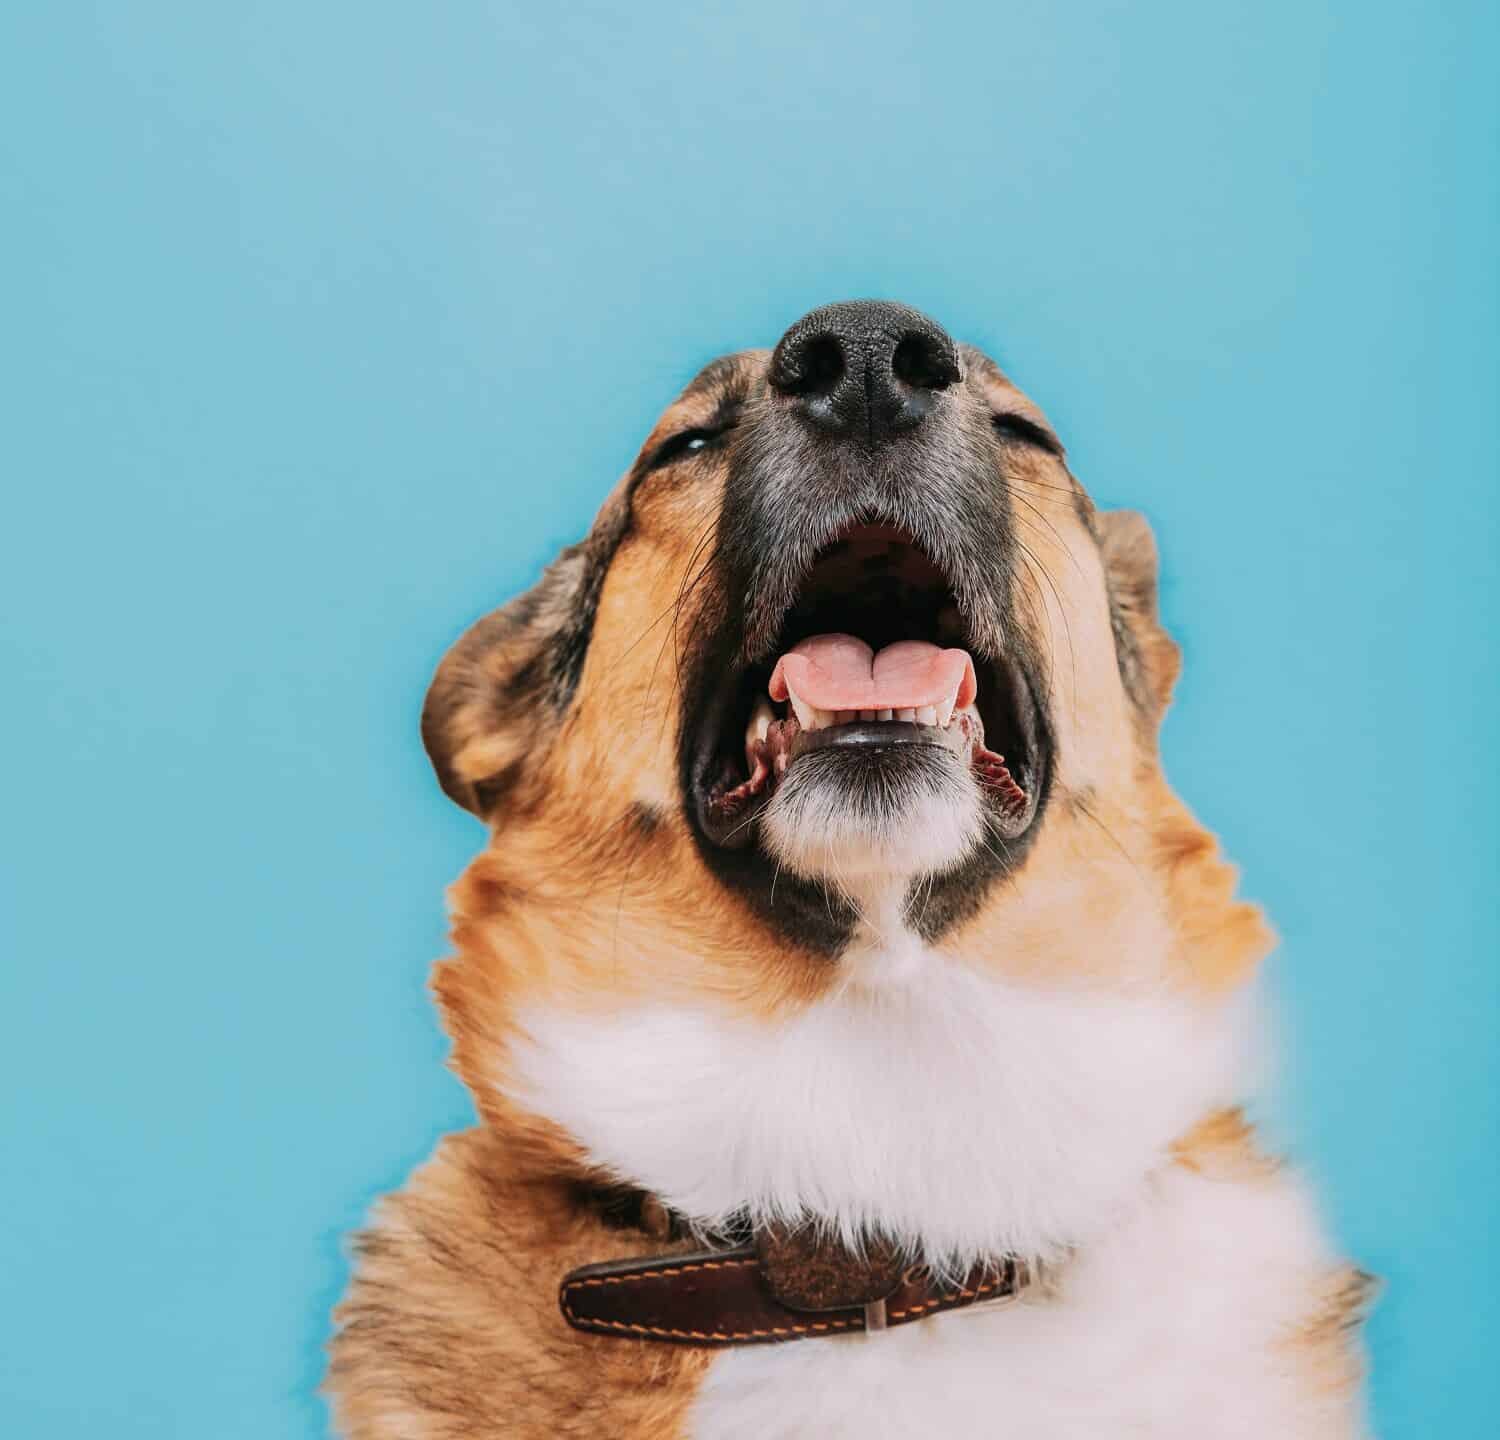 A canine affected by kennel cough, demonstrating the characteristic coughing and respiratory symptoms associated with this contagious respiratory condition.